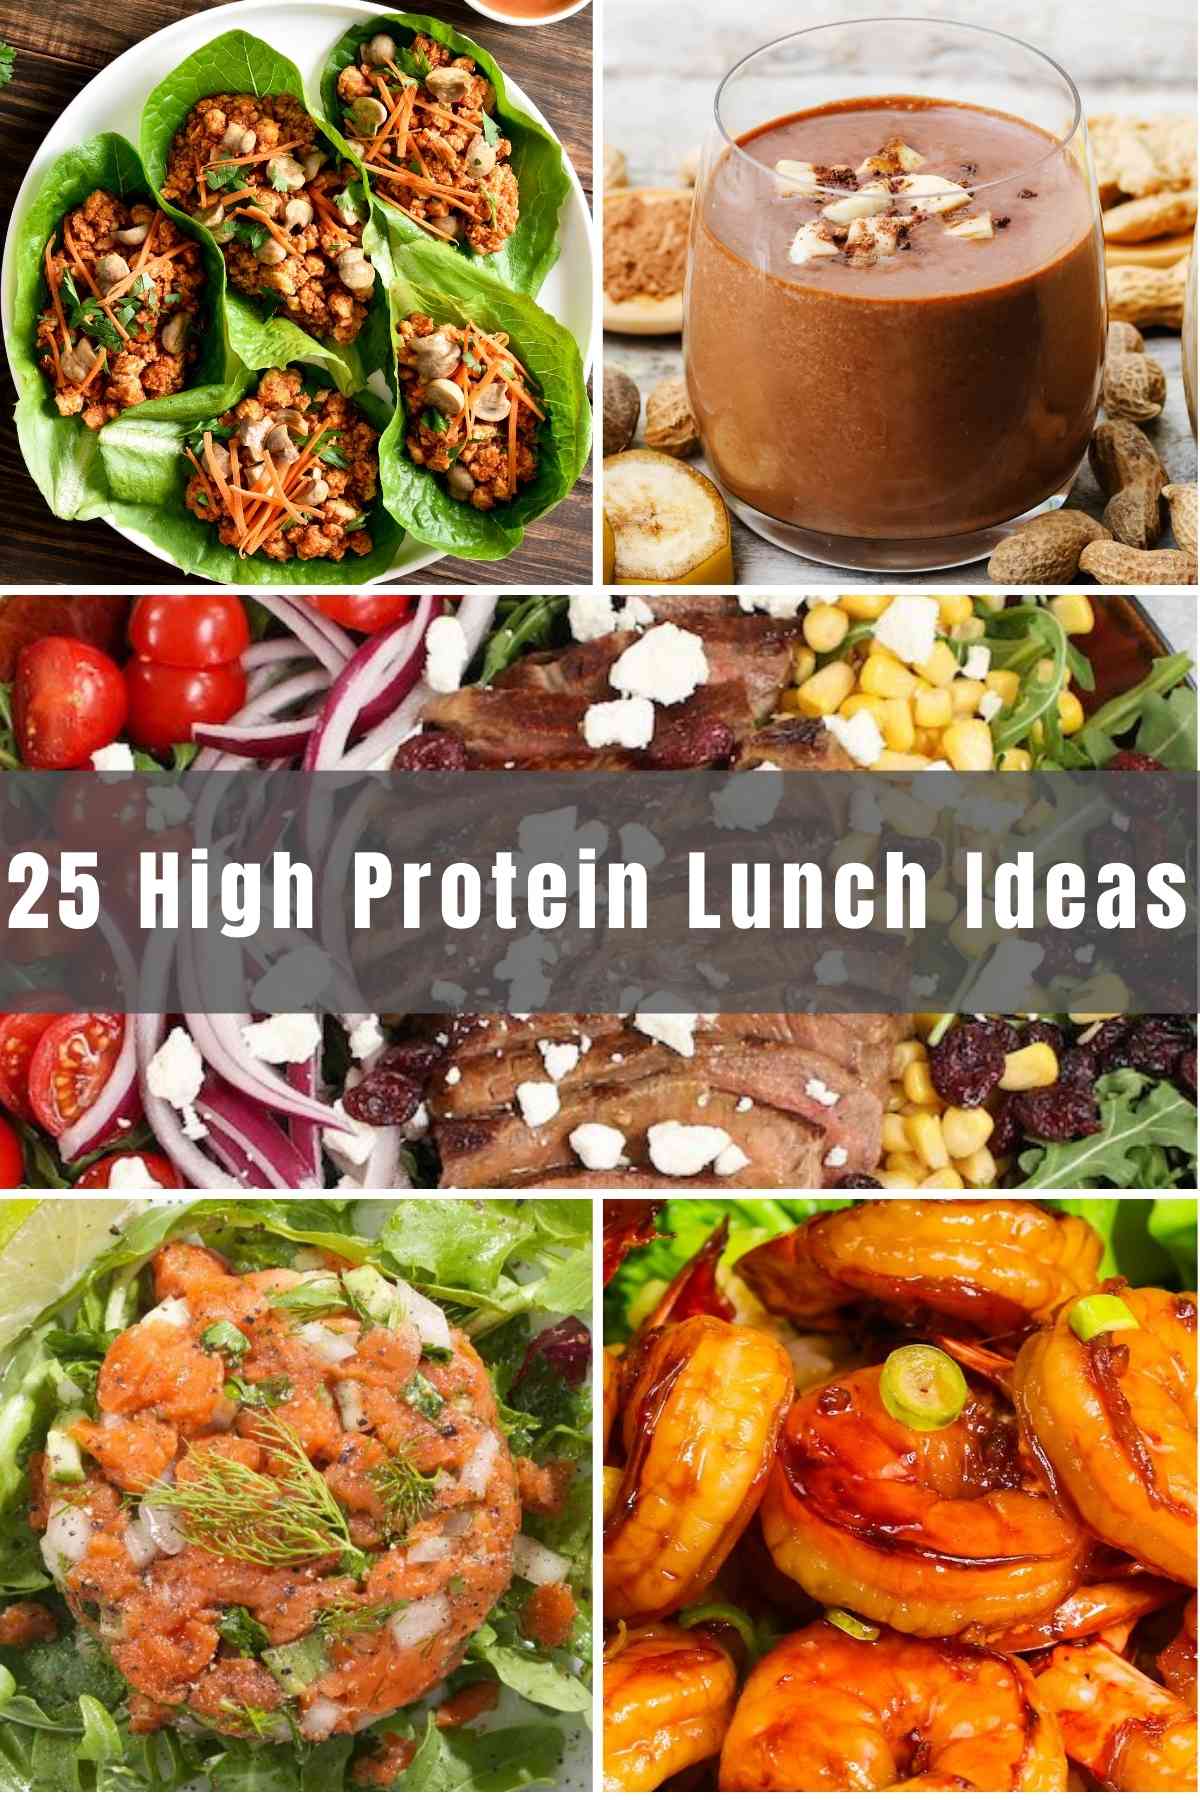 If you’re aiming to lose weight or simply maintain your overall health, these 25 satisfying High Protein Lunch Ideas will help you to achieve your goals.